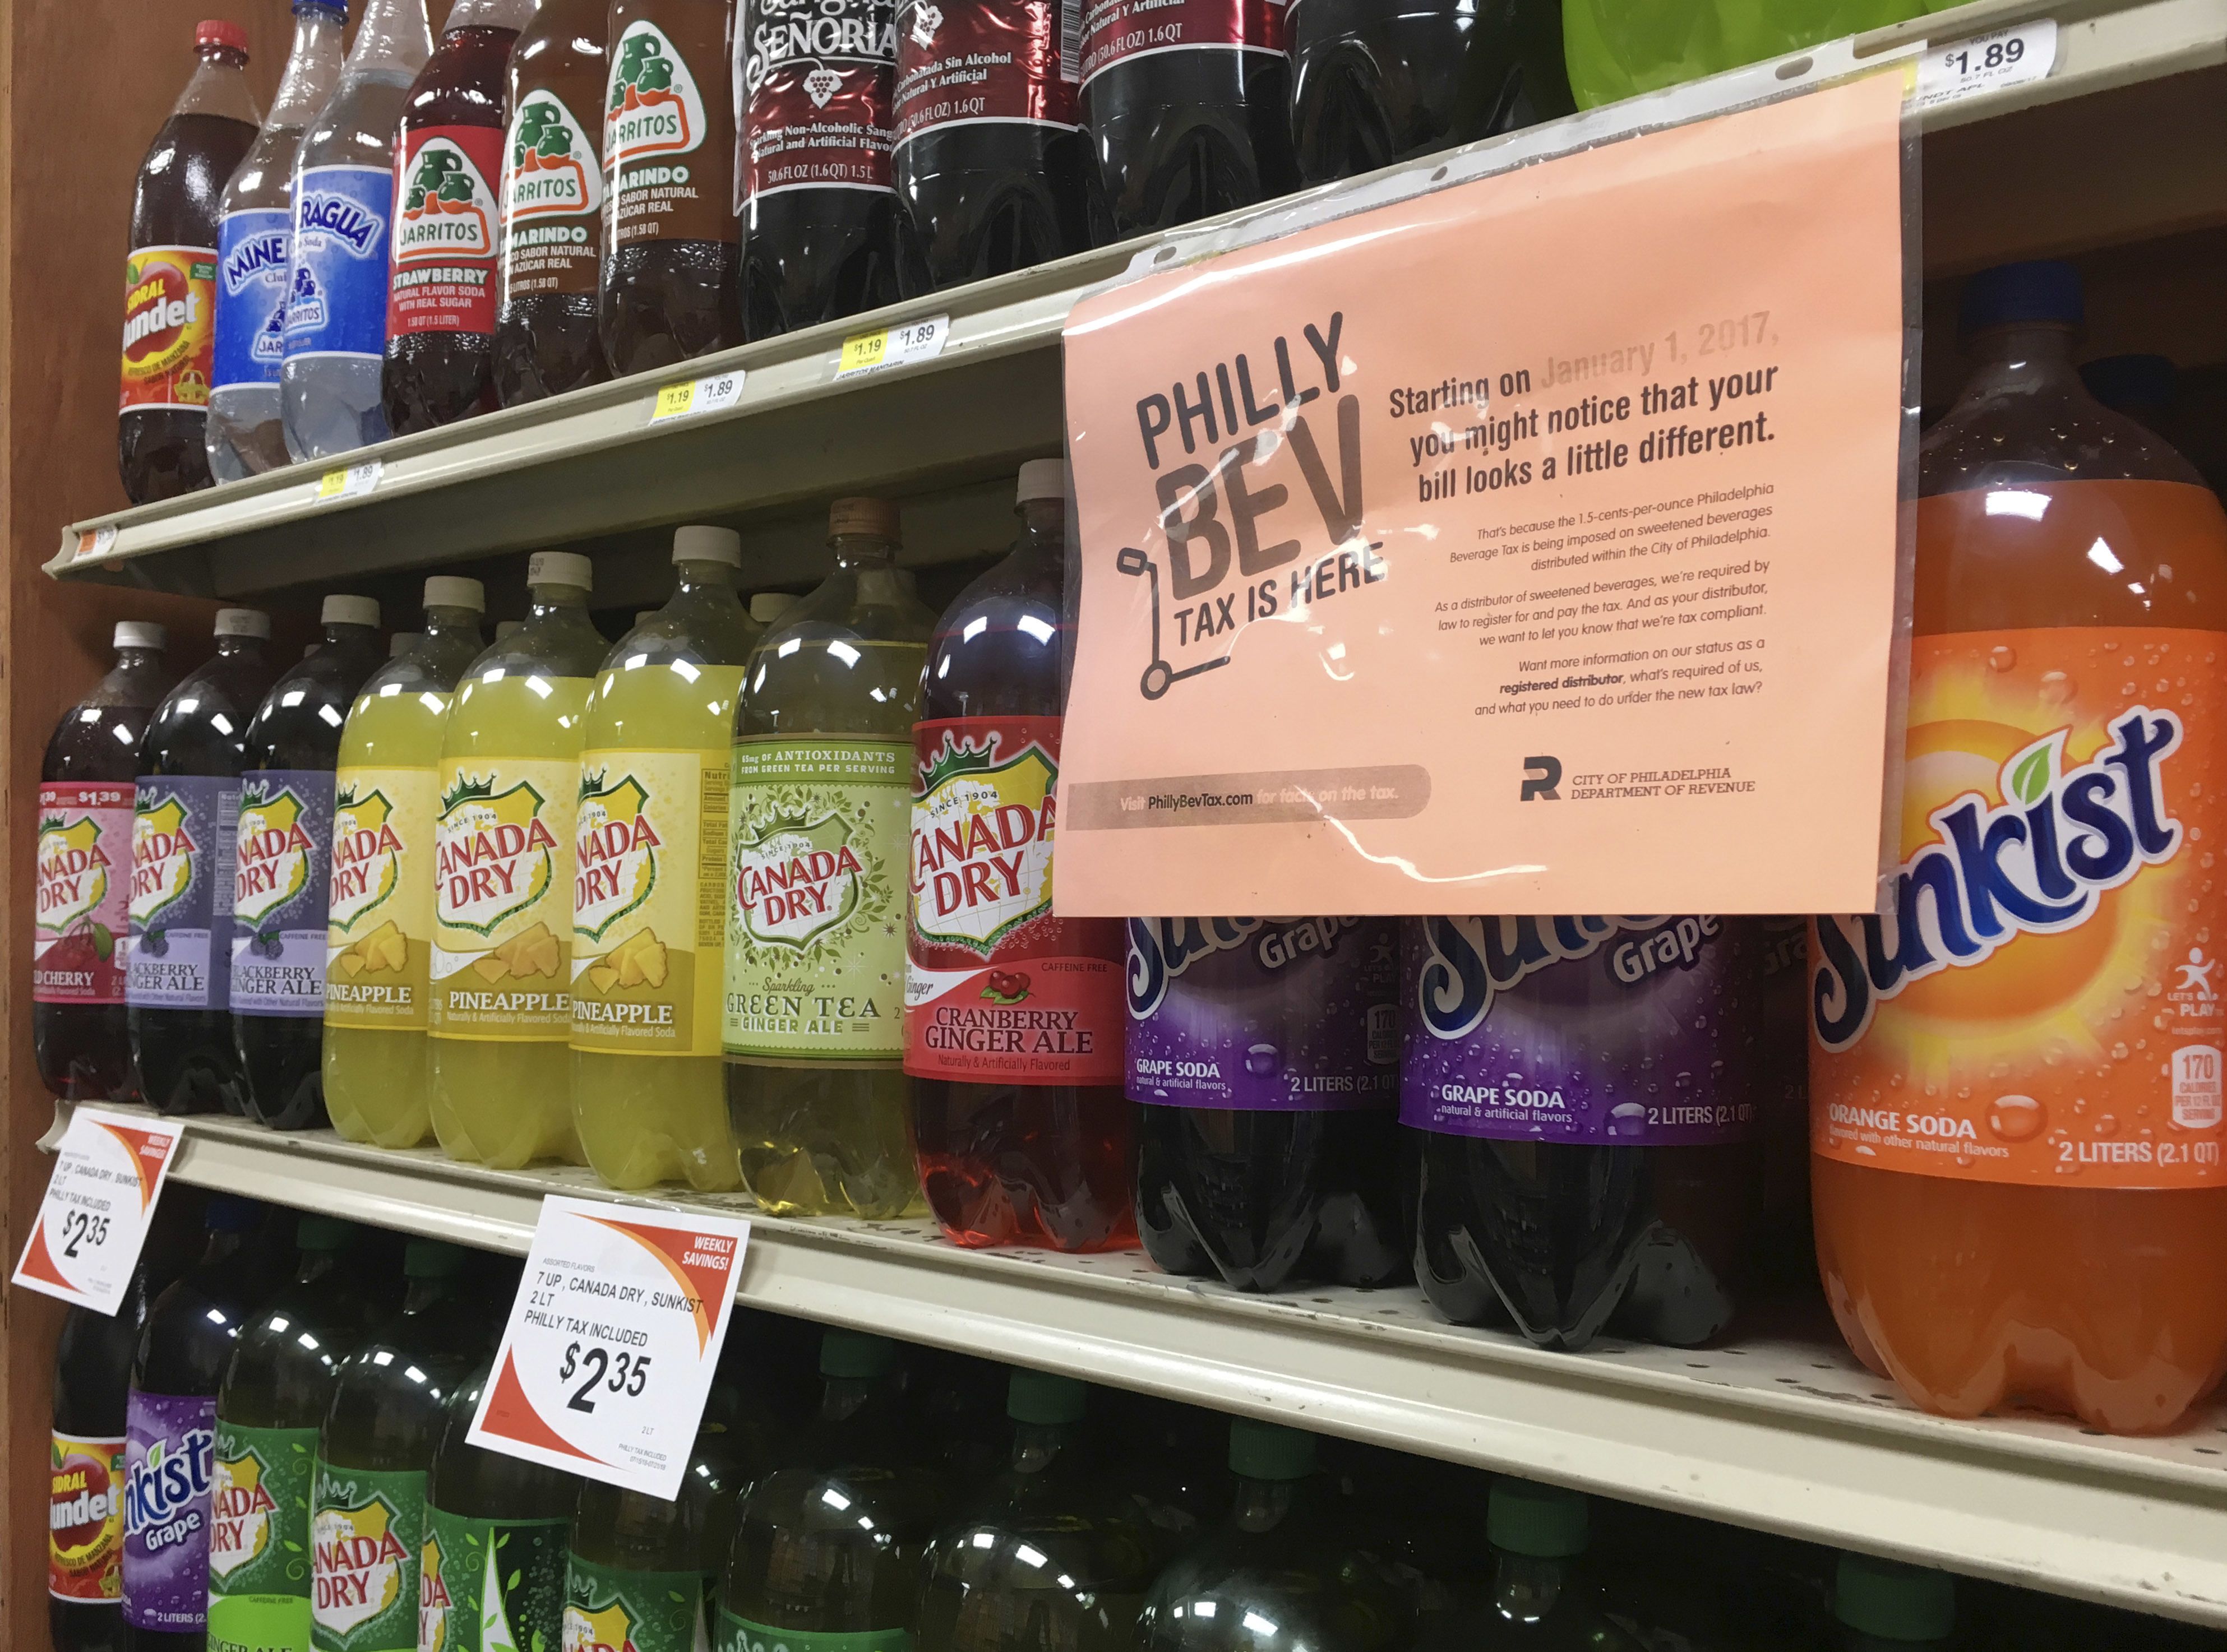 Sugary drink sales fall 38% after Philadelphia levied soda tax: study